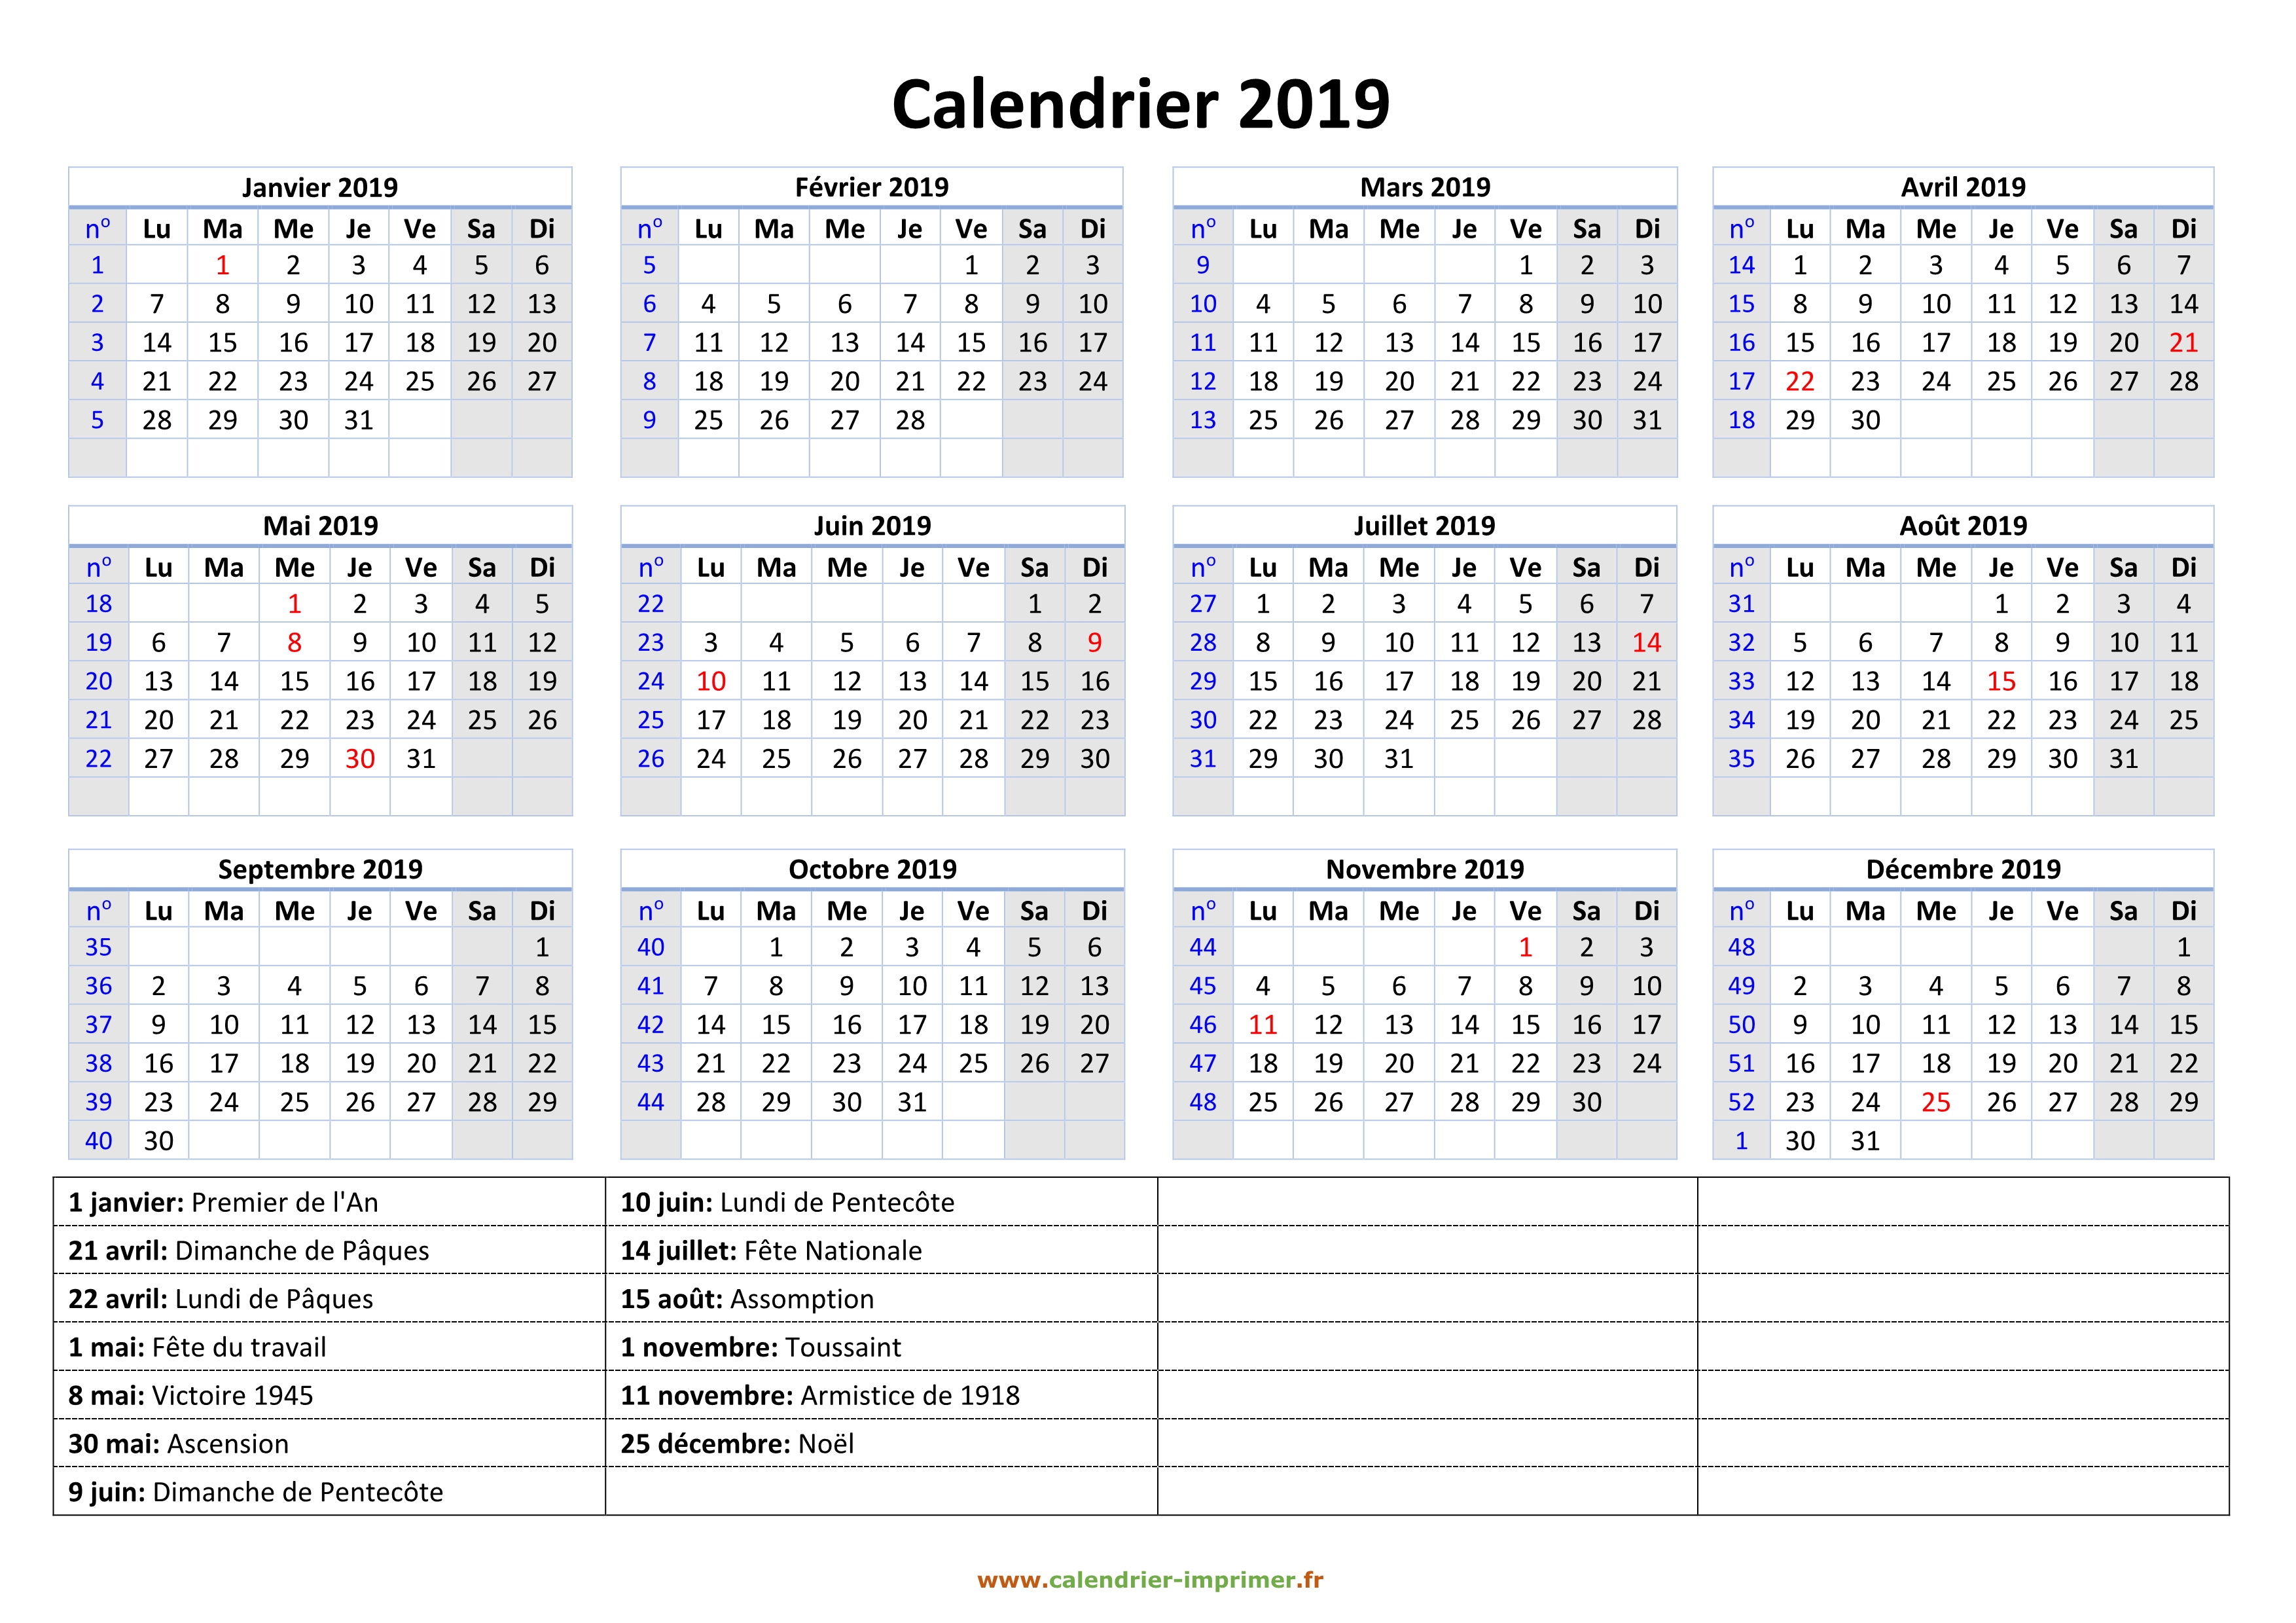 Calendrier semaine 20 - young planneur